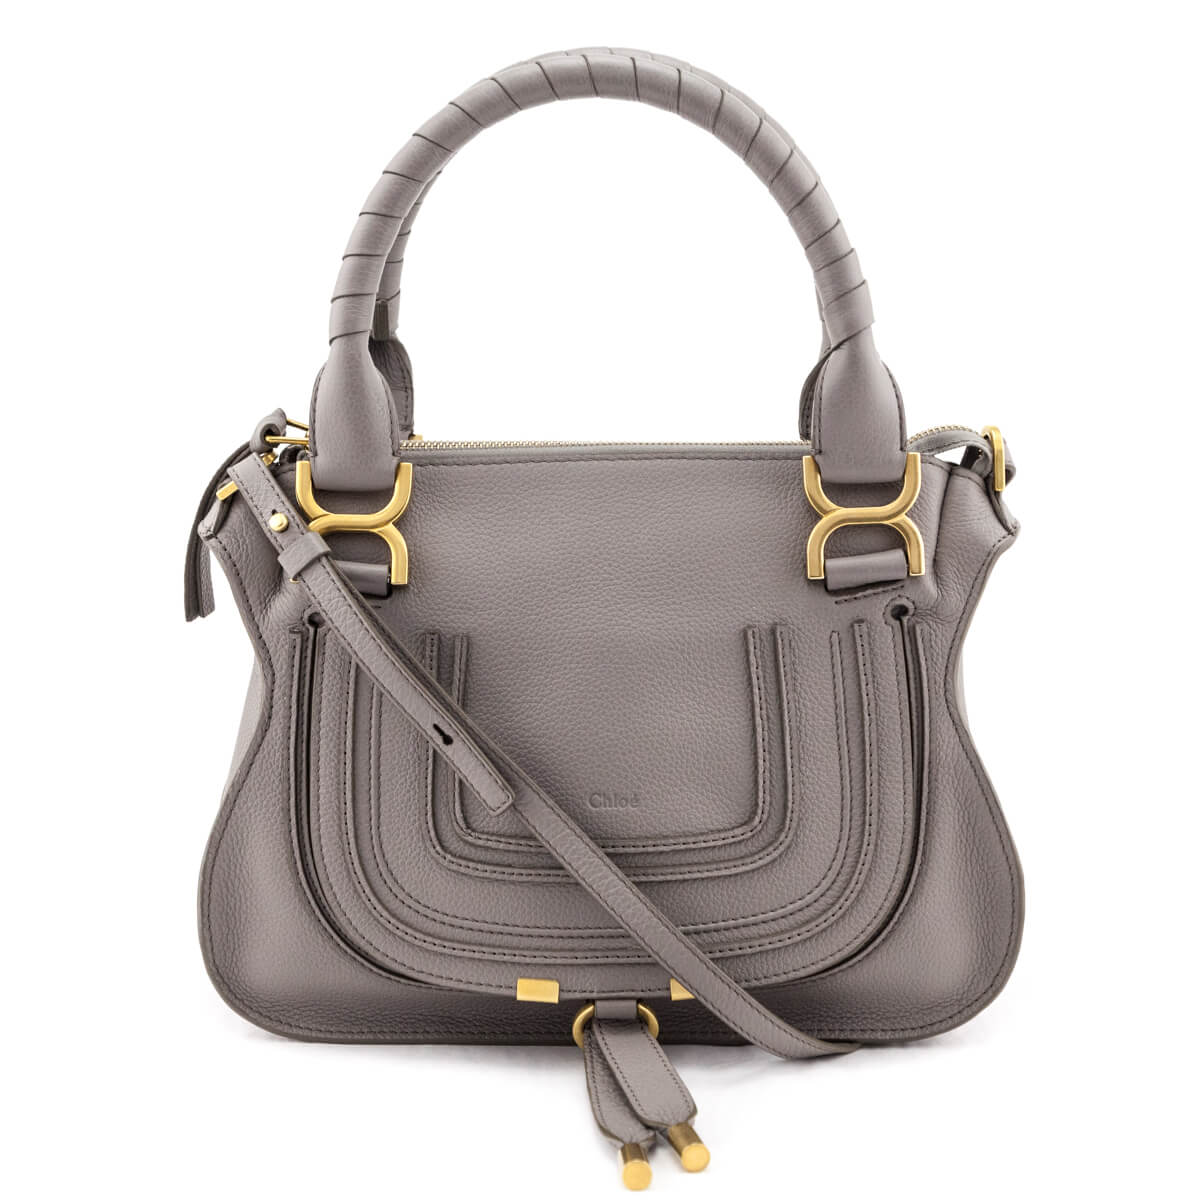 Chloe Cashmere Grey Calfskin Small Marcie Satchel - Love that Bag etc - Preowned Authentic Designer Handbags & Preloved Fashions